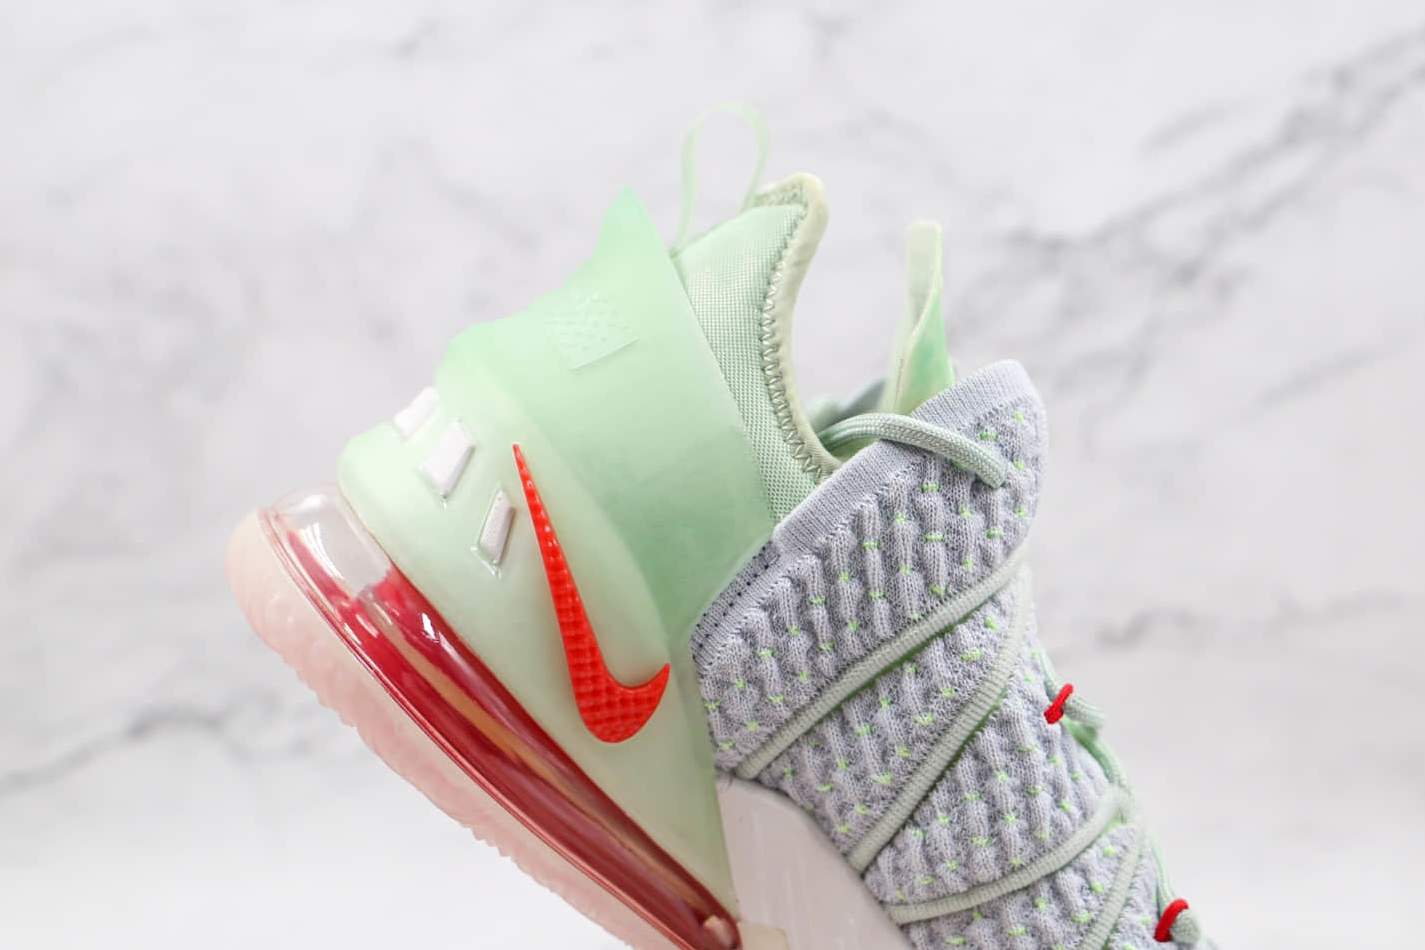 Nike LeBron 18 EP 'Empire Jade' DB7644-002 - Shop the Latest LeBron 18 EP in Empire Jade Colorway